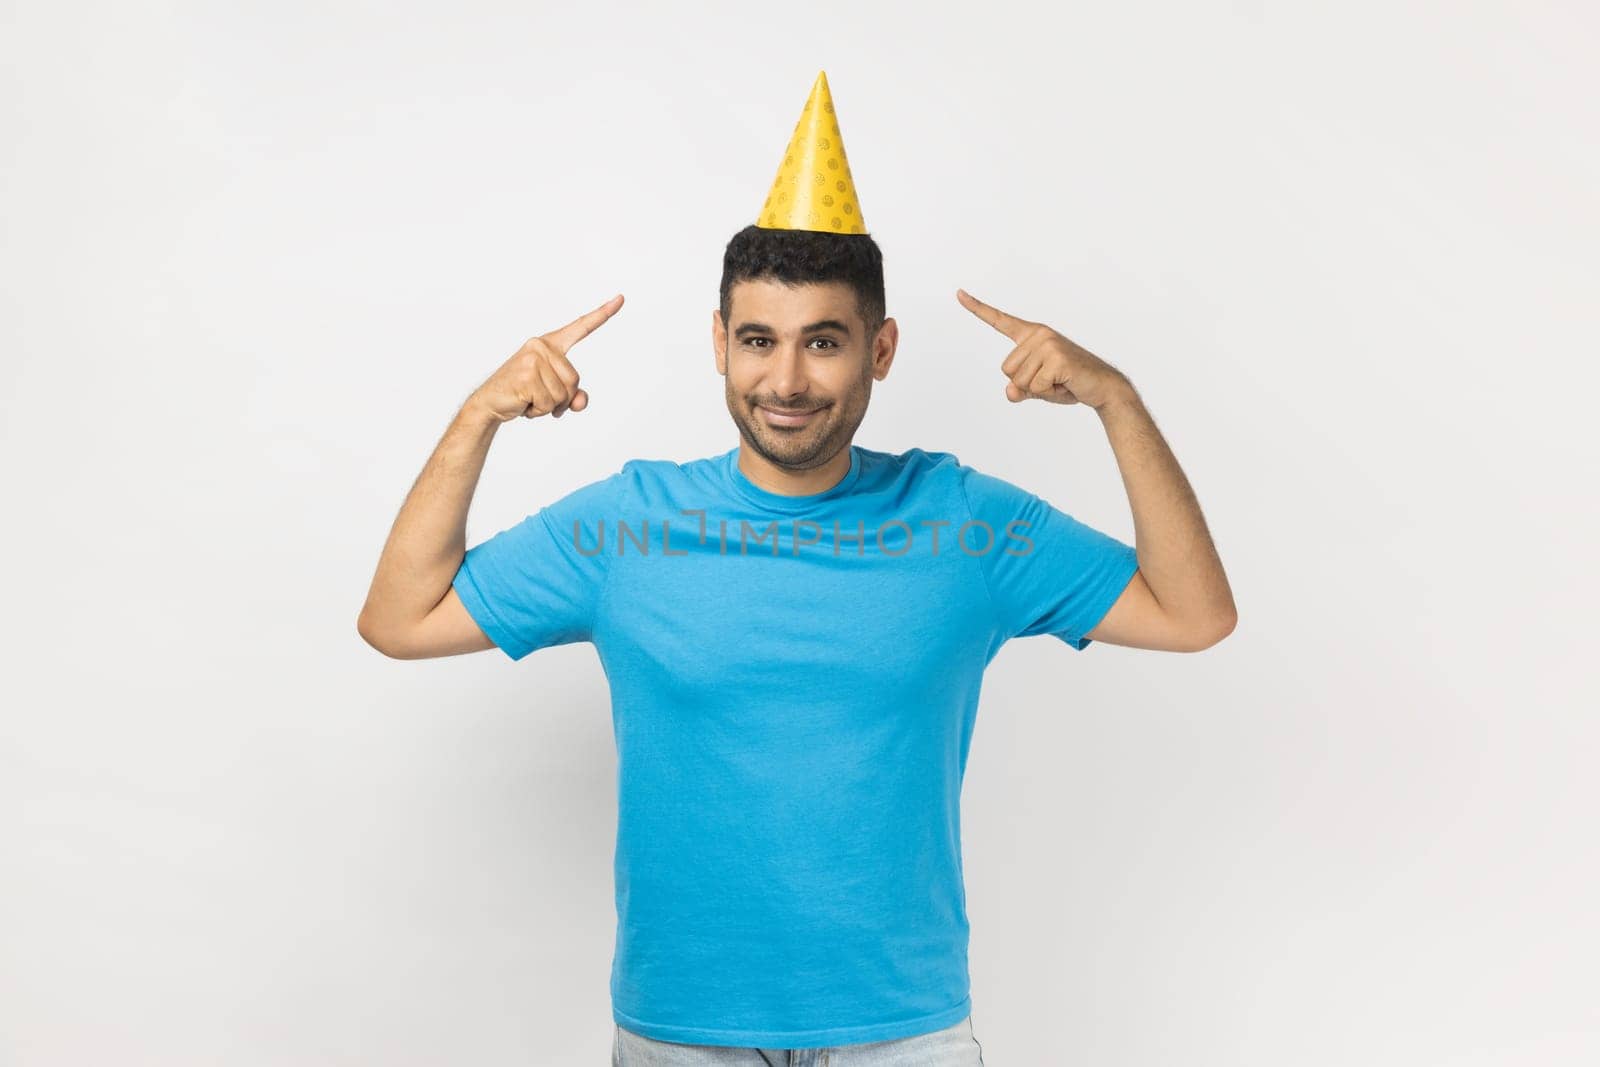 Portrait of festive positive optimistic unshaven man wearing blue T- shirt standing and pointing at yellow party cone, celebrating his birthday. Indoor studio shot isolated on gray background.